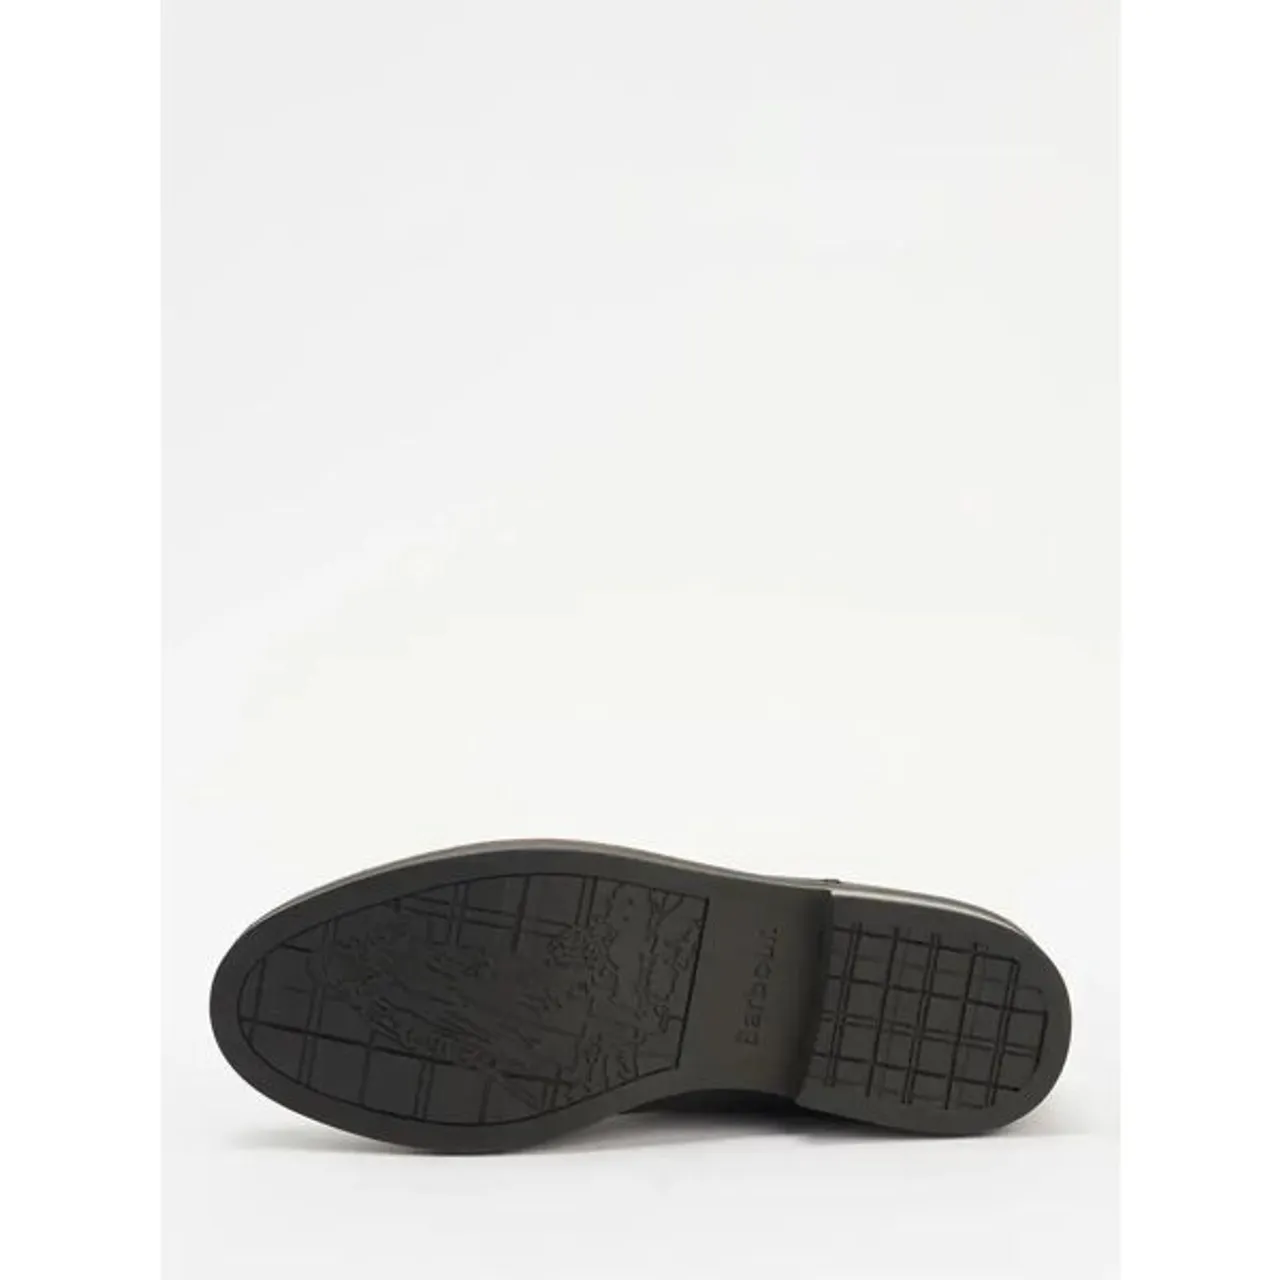 Barbour Farsley Slip On Boots - Black - Male